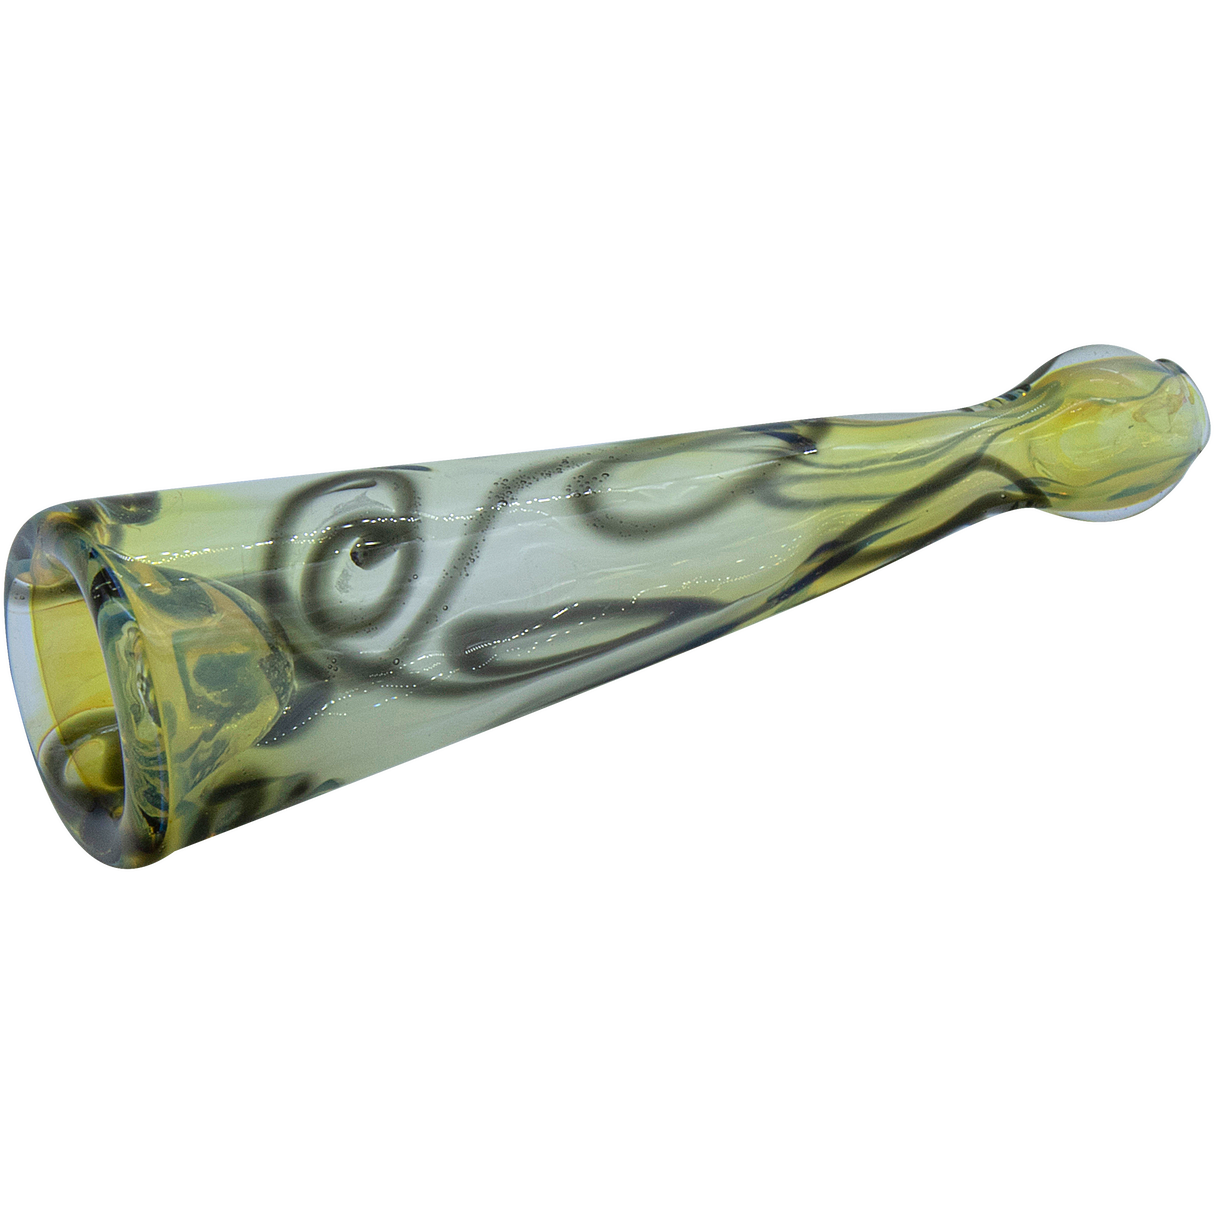 LA Pipes Inside-Out Funnel Chillum for Dry Herbs, Fumed Color Changing, 4.5" Length, Side View